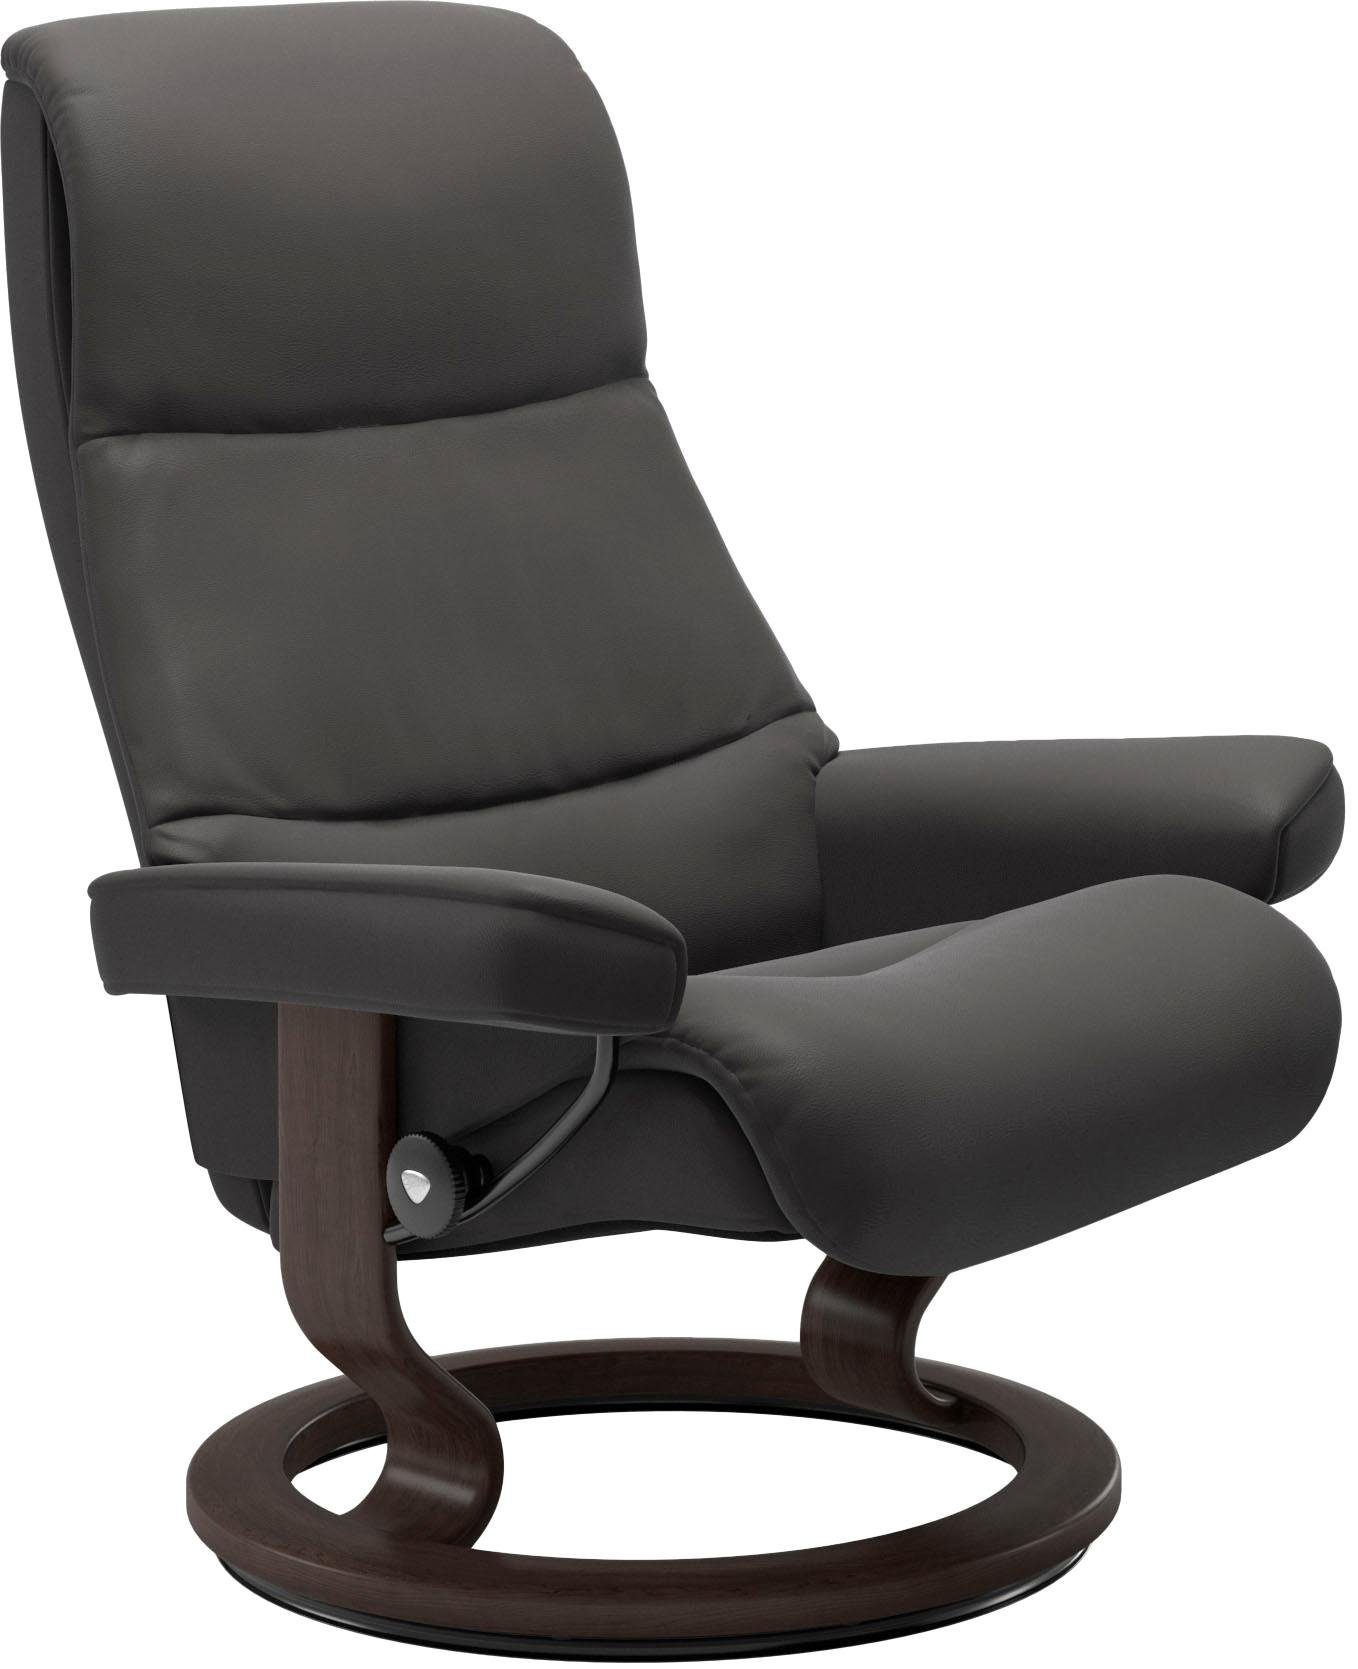 mit Base, Größe M,Gestell Stressless® Relaxsessel Wenge View, Classic